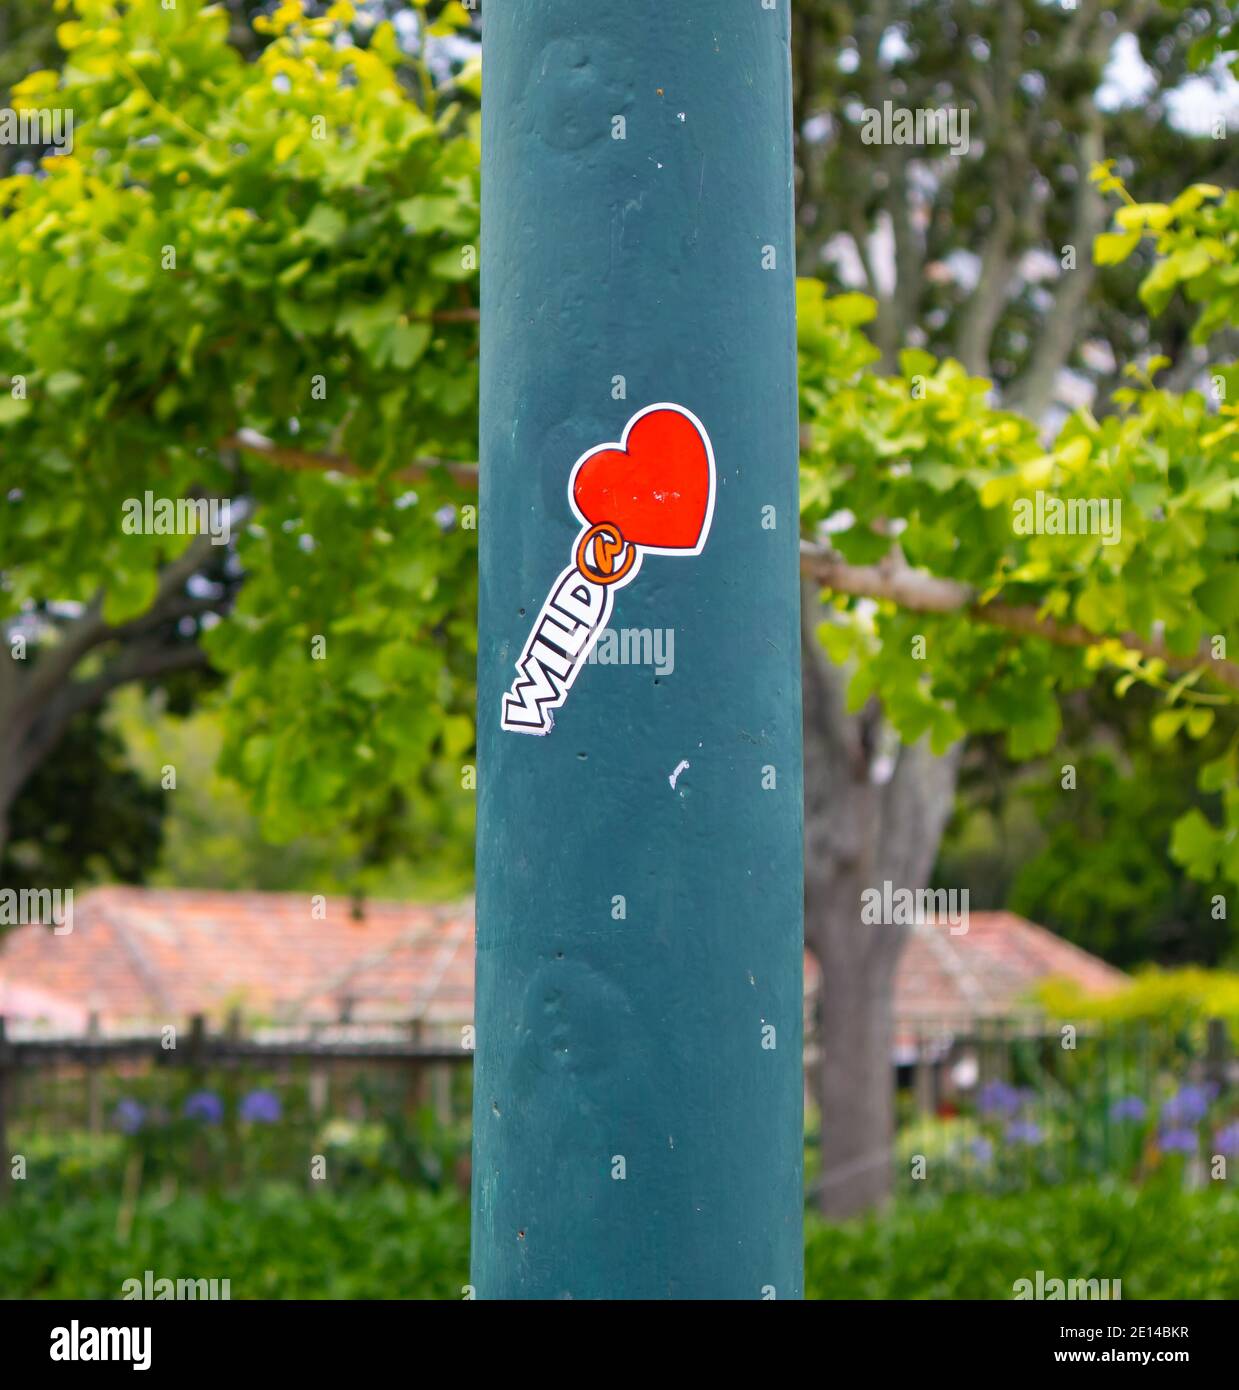 Gardens-  Cape Town, South Africa - 23/11/2020 Green pole with funky red 'Wild at Heart' sticker on it. Greenery in background. Stock Photo